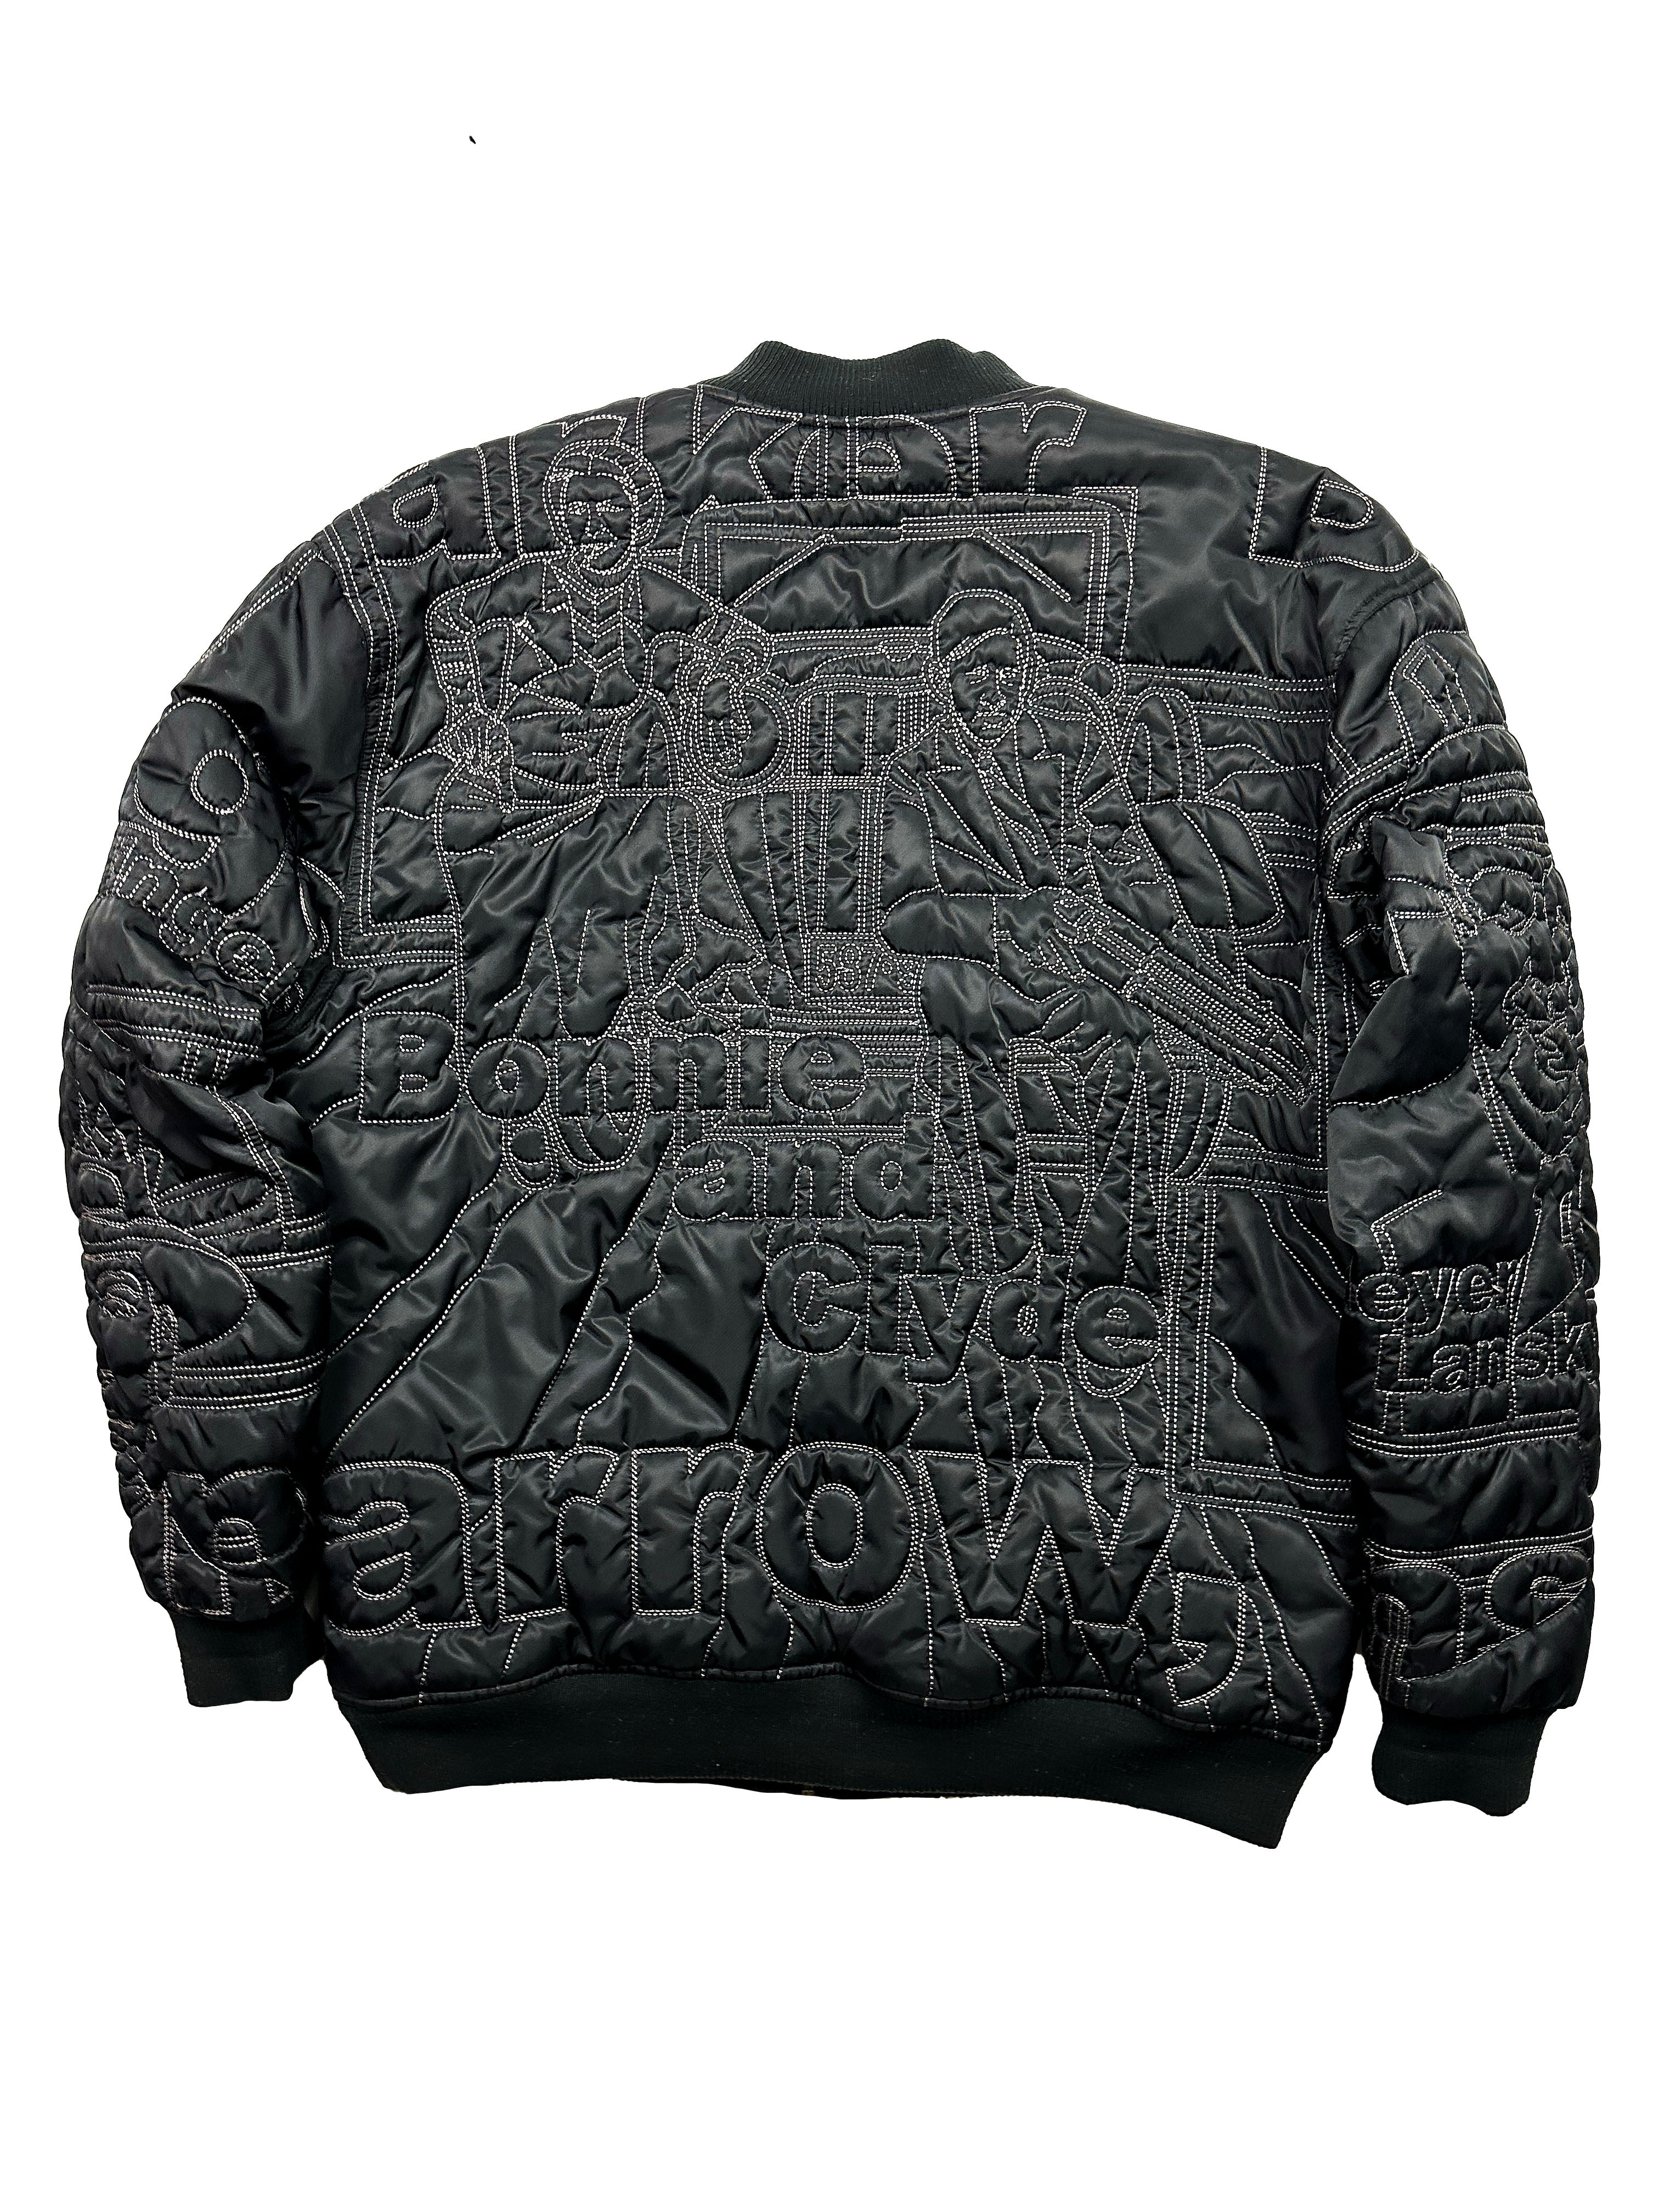 Pelle Pelle 'Gangsters' Embroidered Bomber 00's